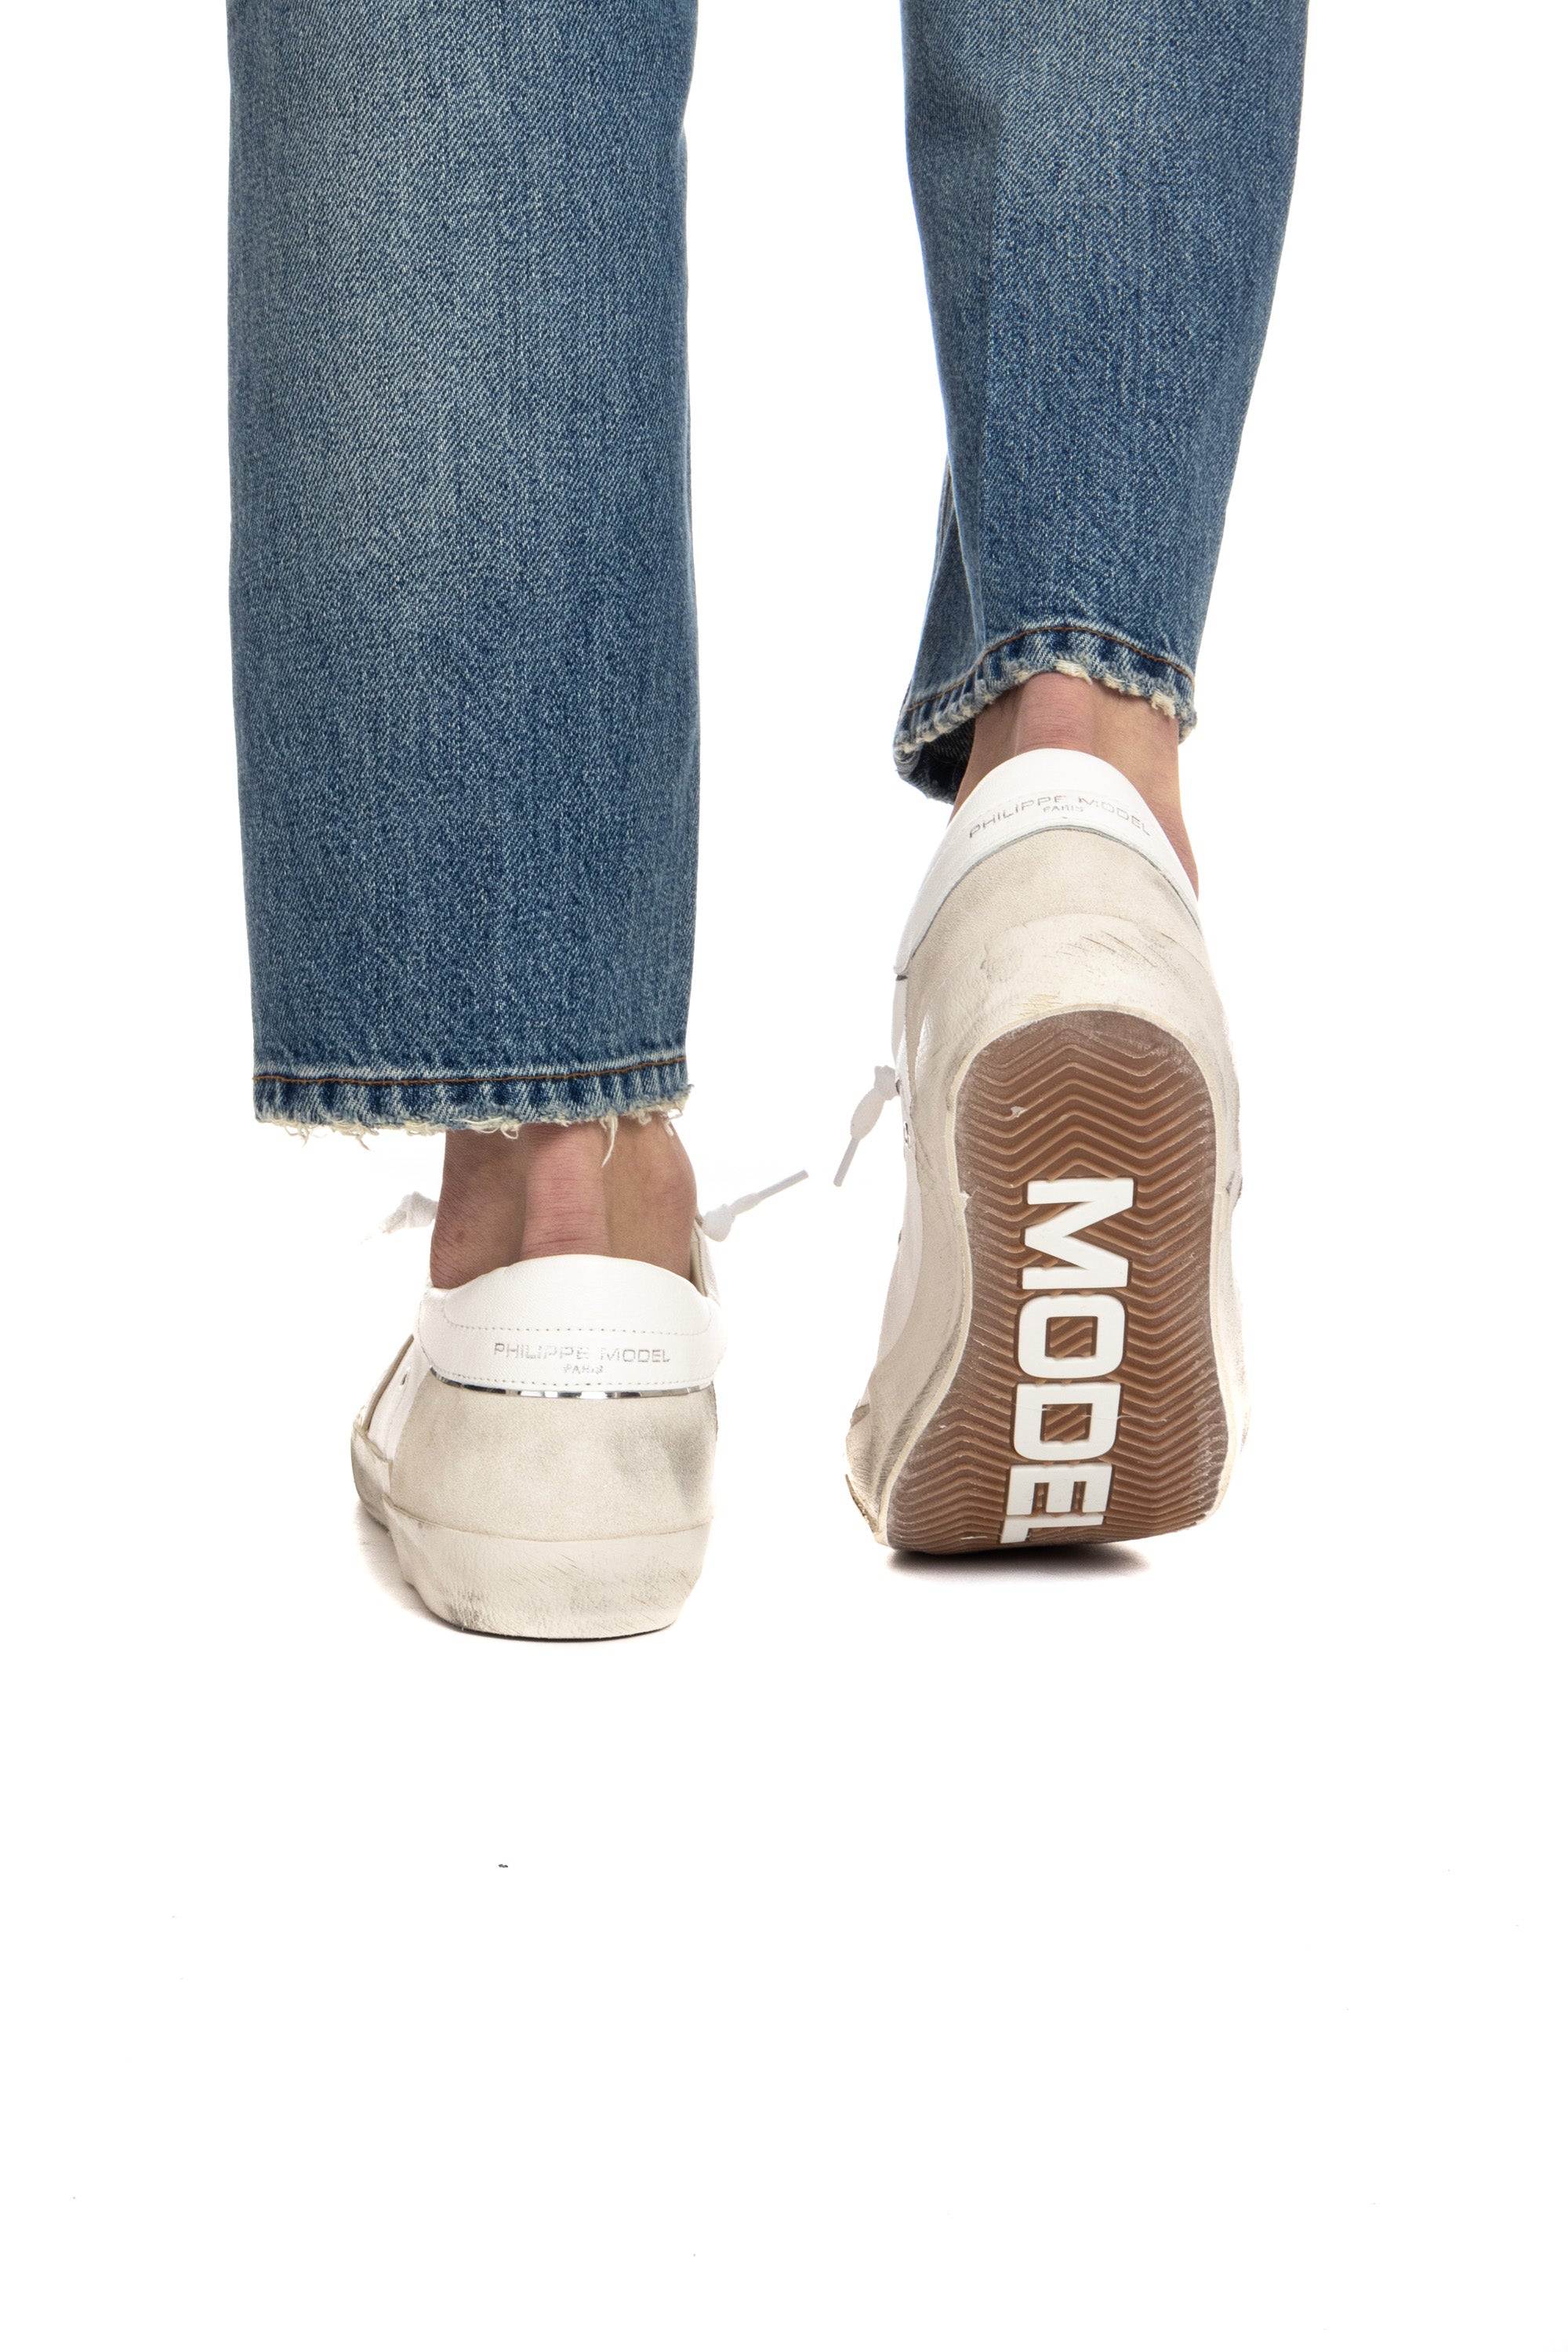 Sneaker in goatskin and suede with white heel tab mod. Paris